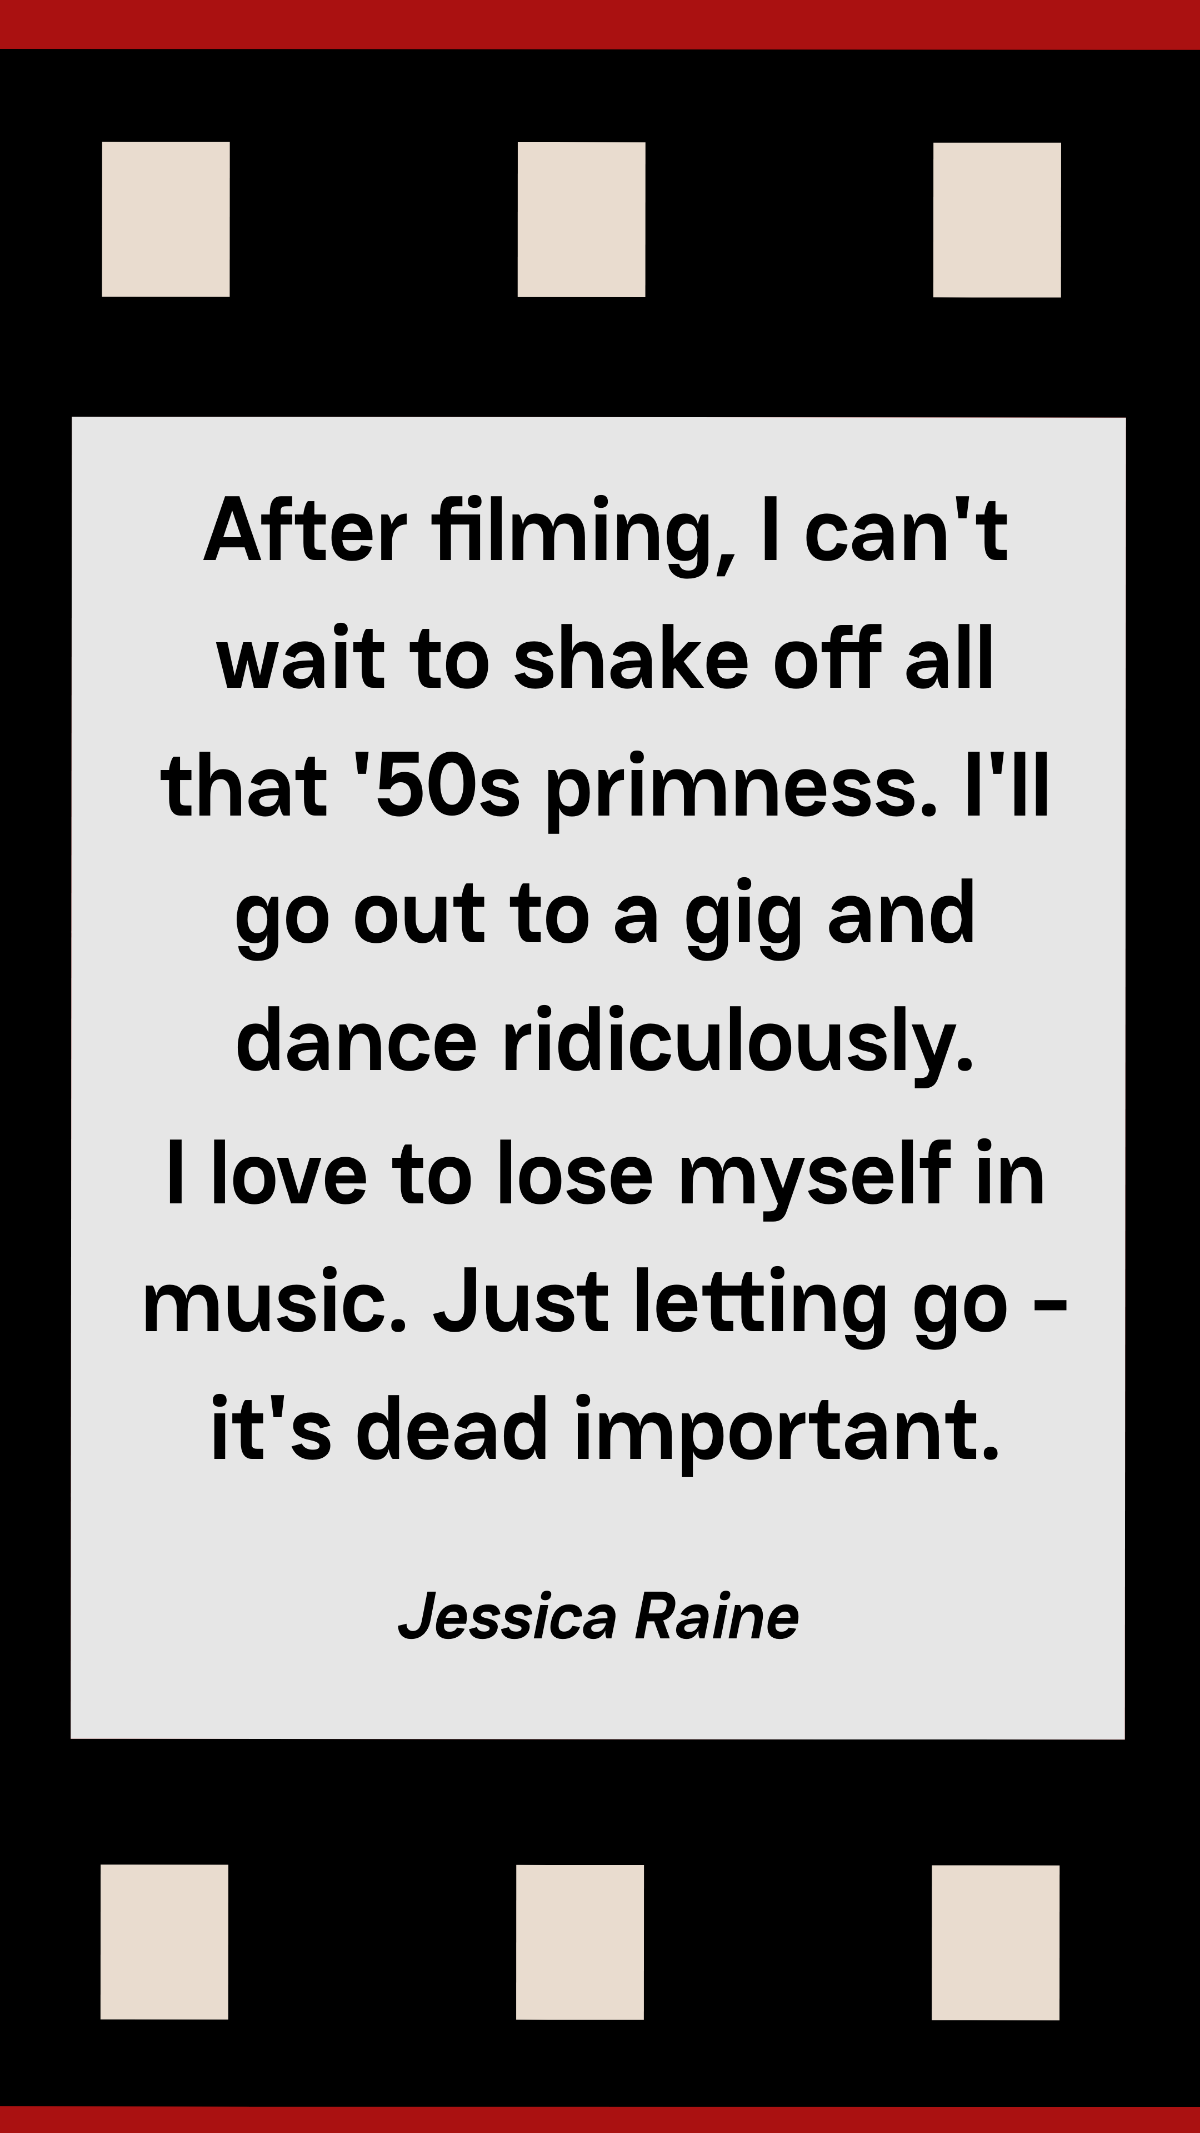 Free Jessica Raine - After filming, I can't wait to shake off all that '50s primness. I'll go out to a gig and dance ridiculously. I love to lose myself in music. Just letting go - it's dead important. Tem